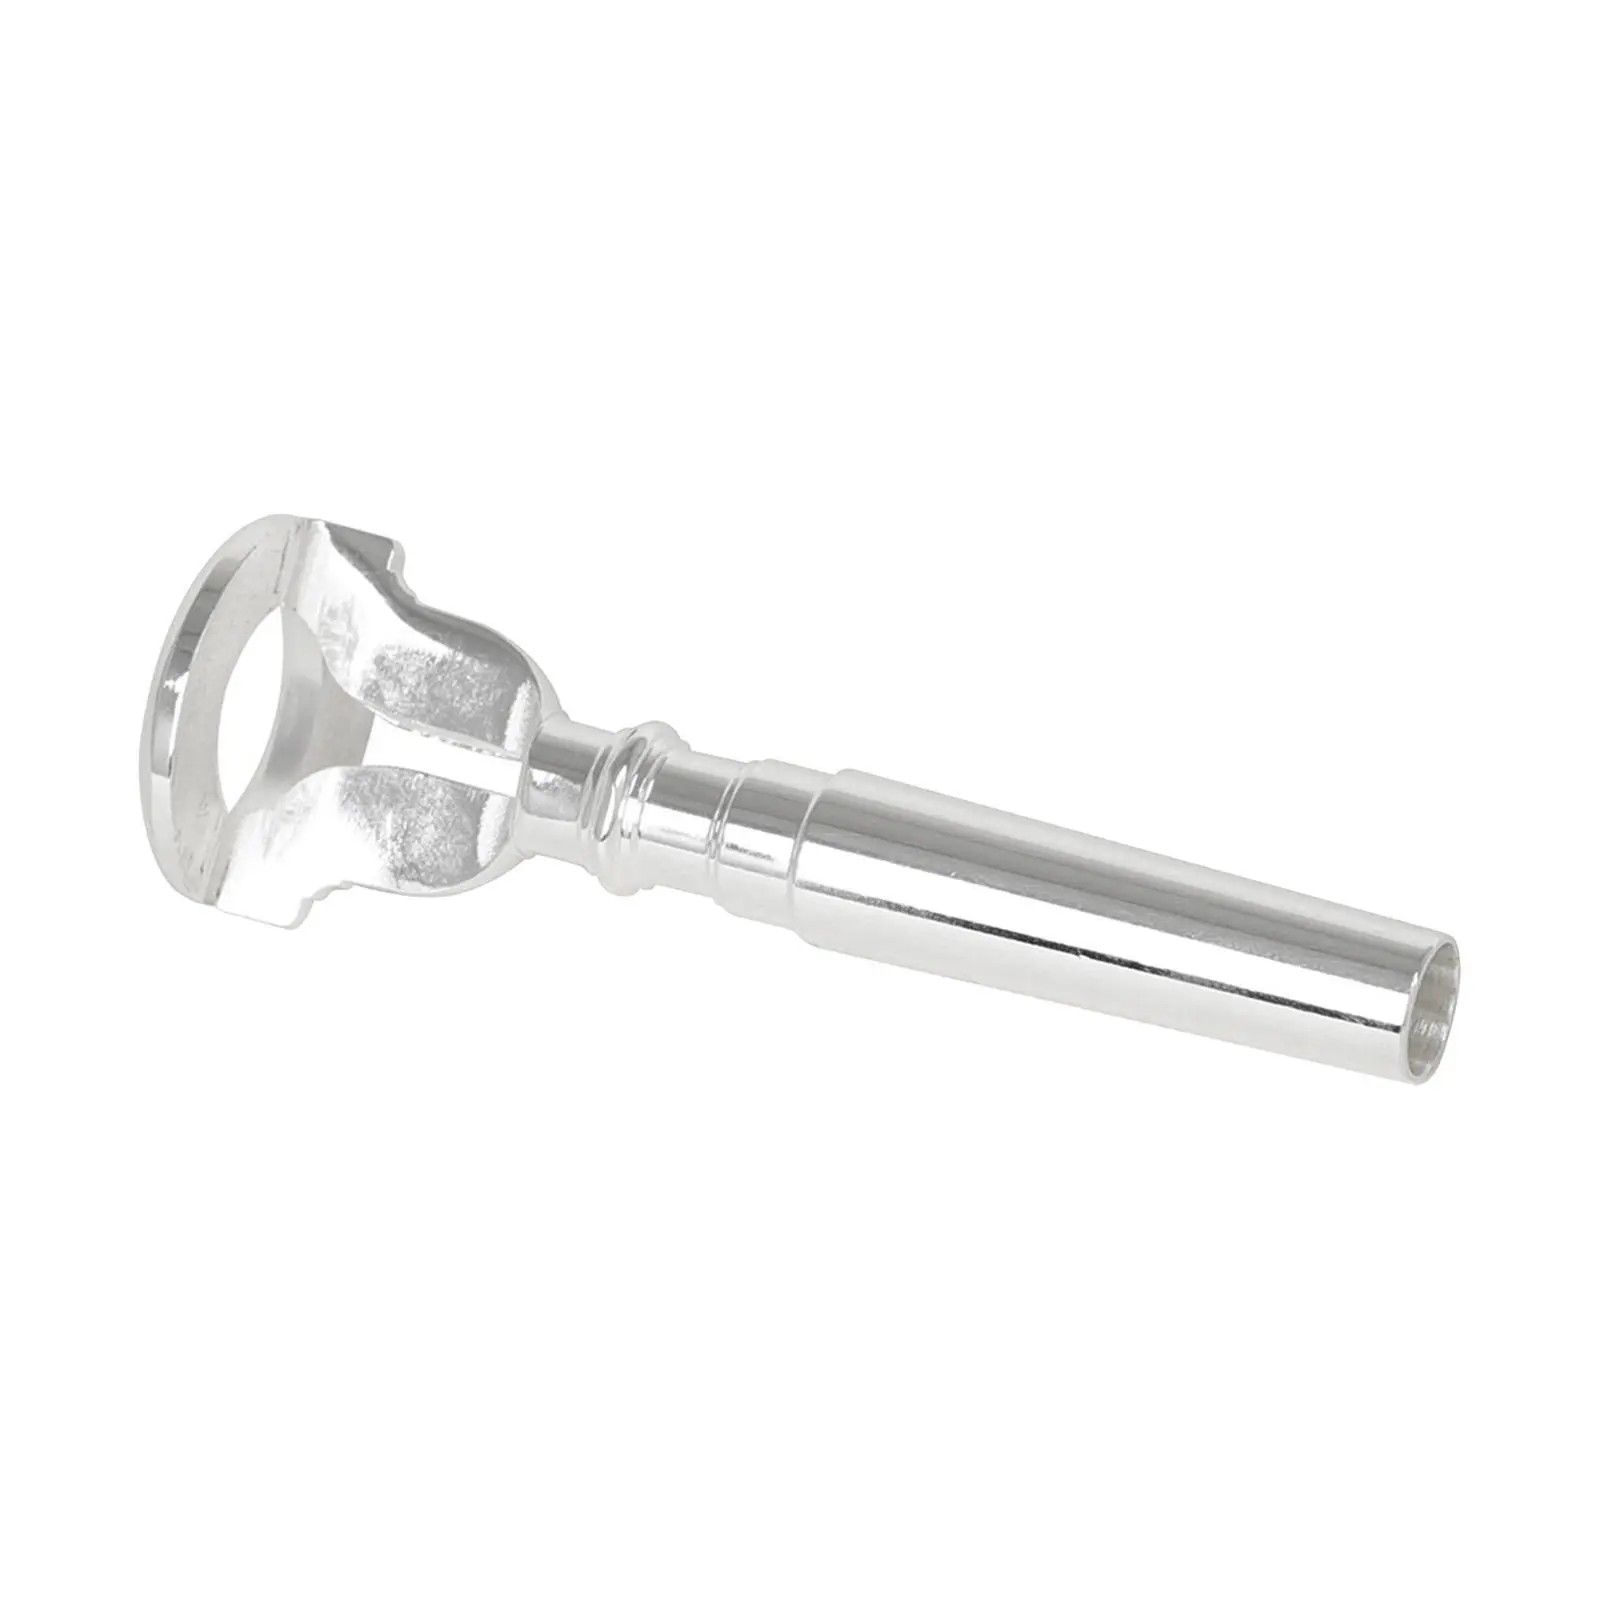 Mouth Trainer Trumpet Mouthpiece Musical Instrument For Trombones